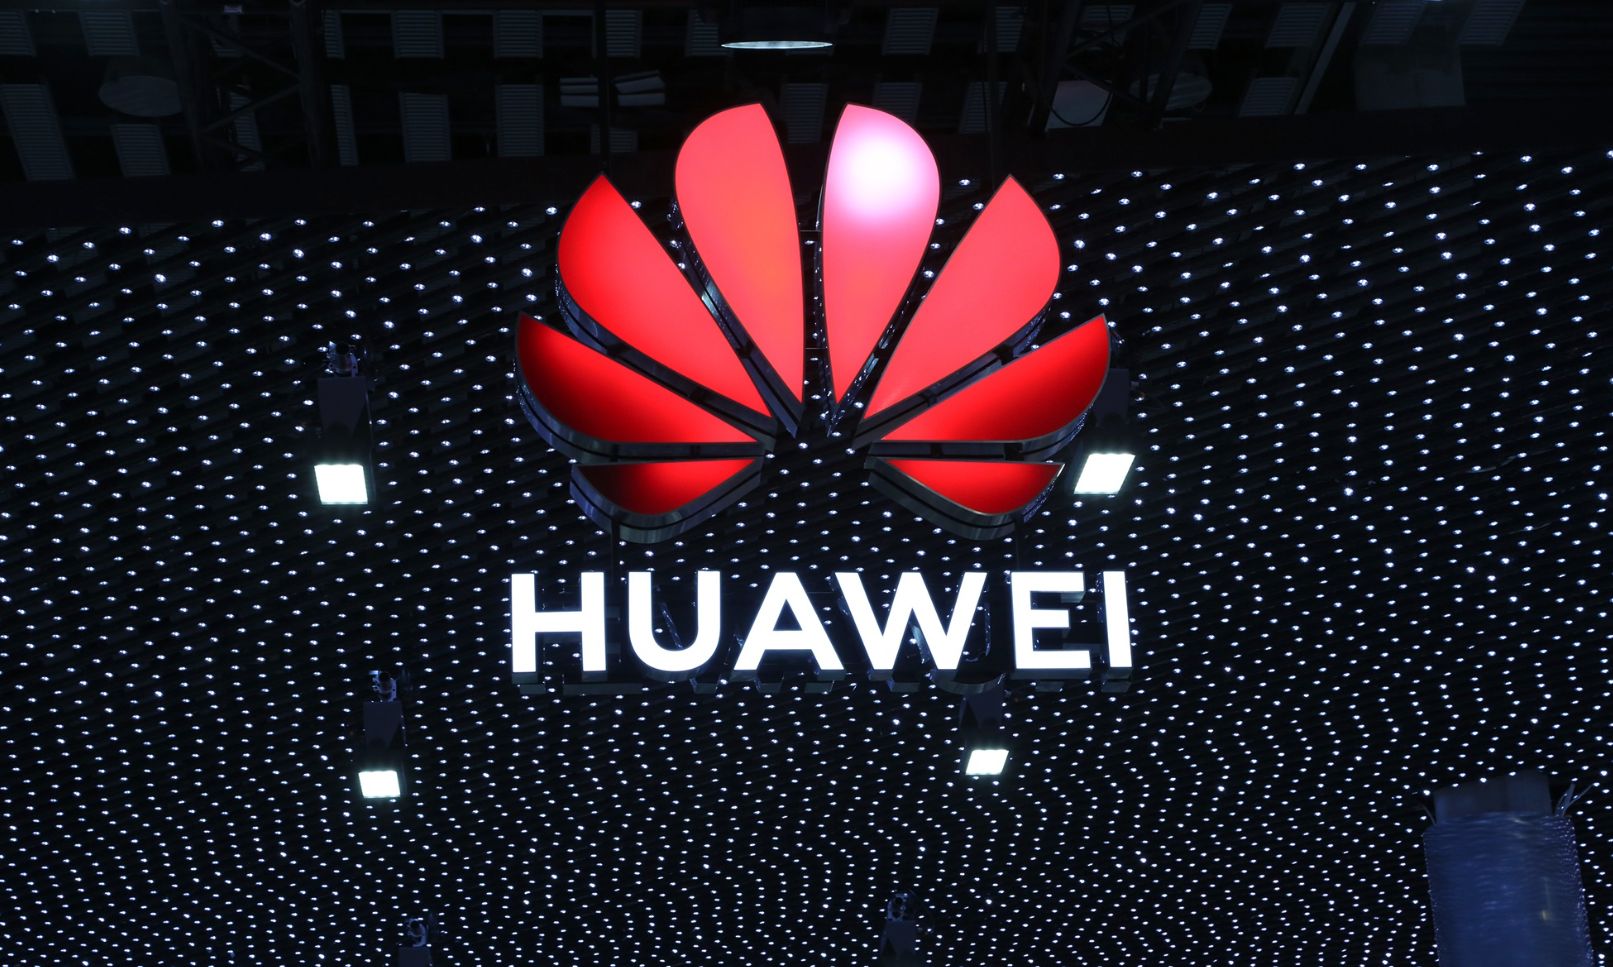 Honor Vision, Honor Vision: HongMeng, Ark OS or Harmony OS: Huawei will integrate its OS into Smart TV in August 2019, 